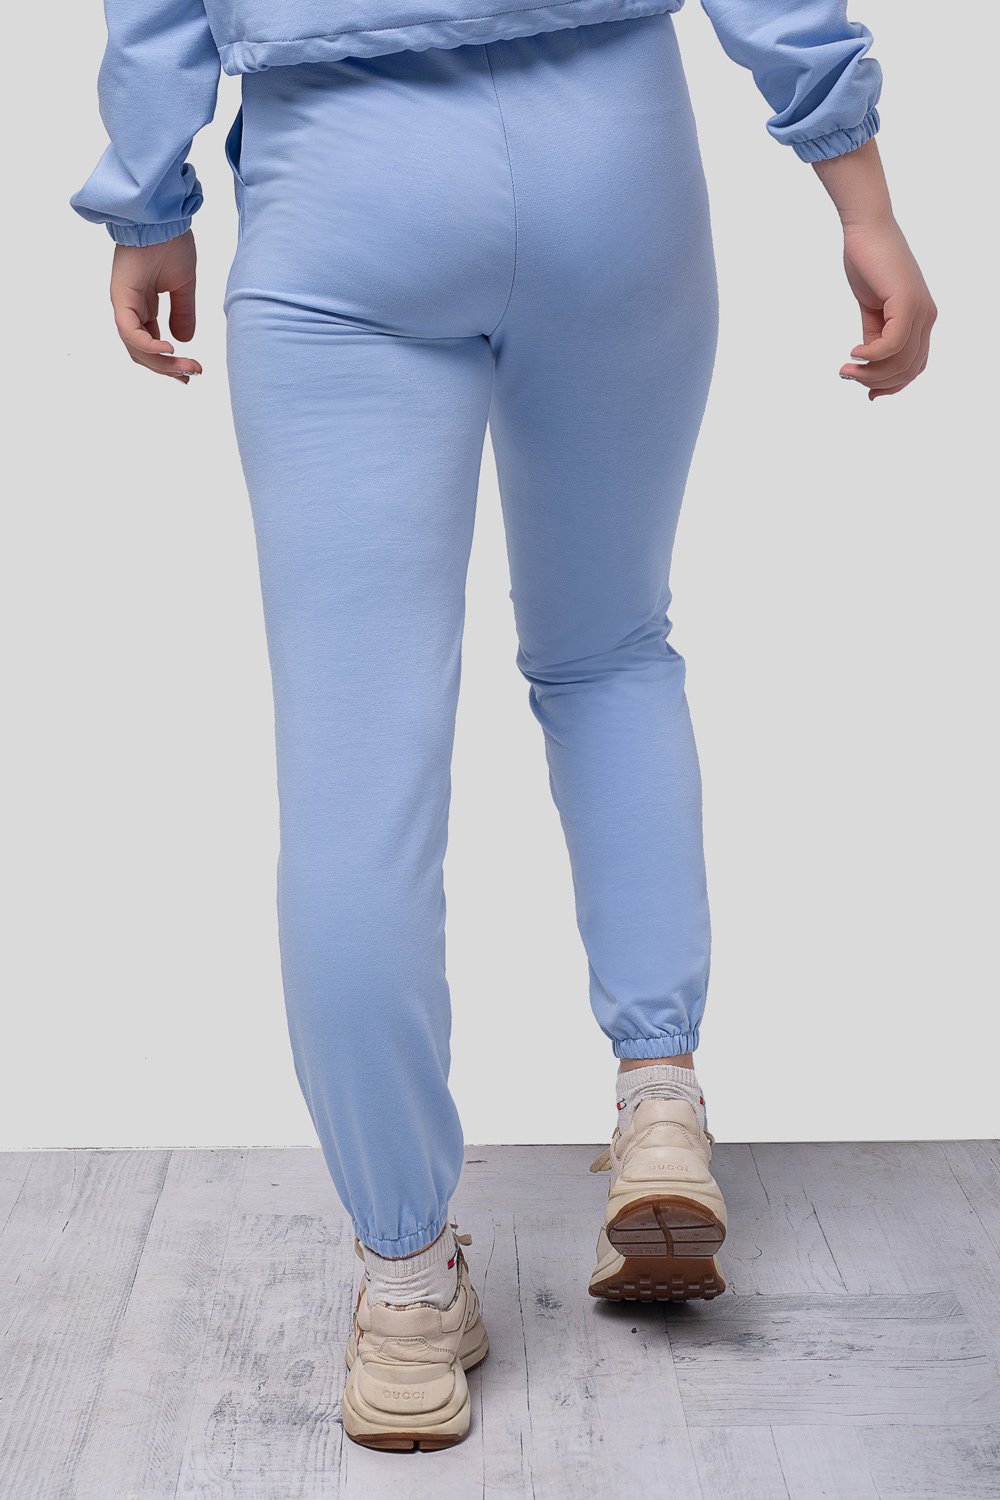 Sky Blue Pants with drawstrings